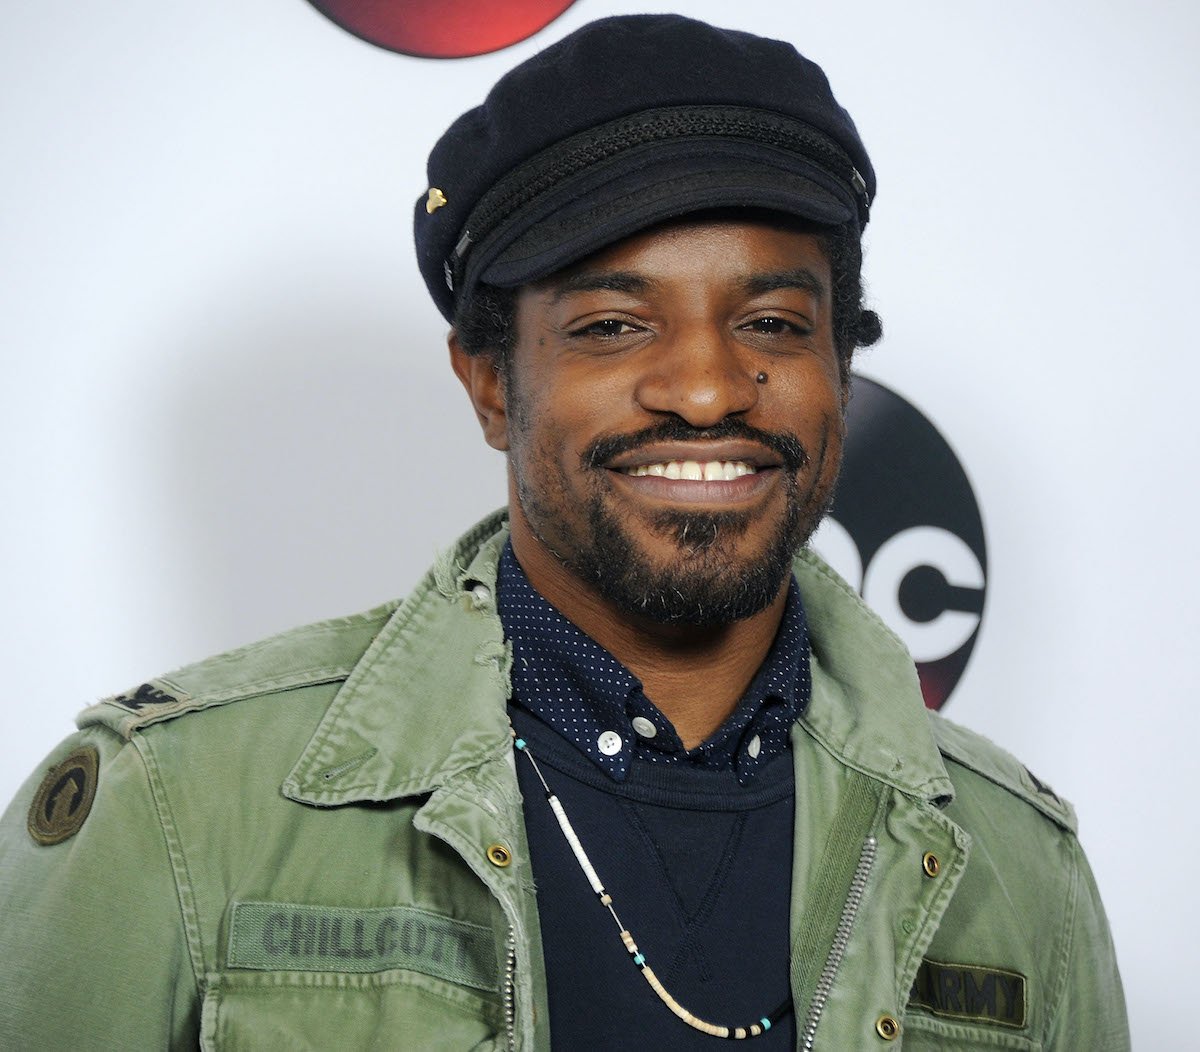 André 3000 at an event